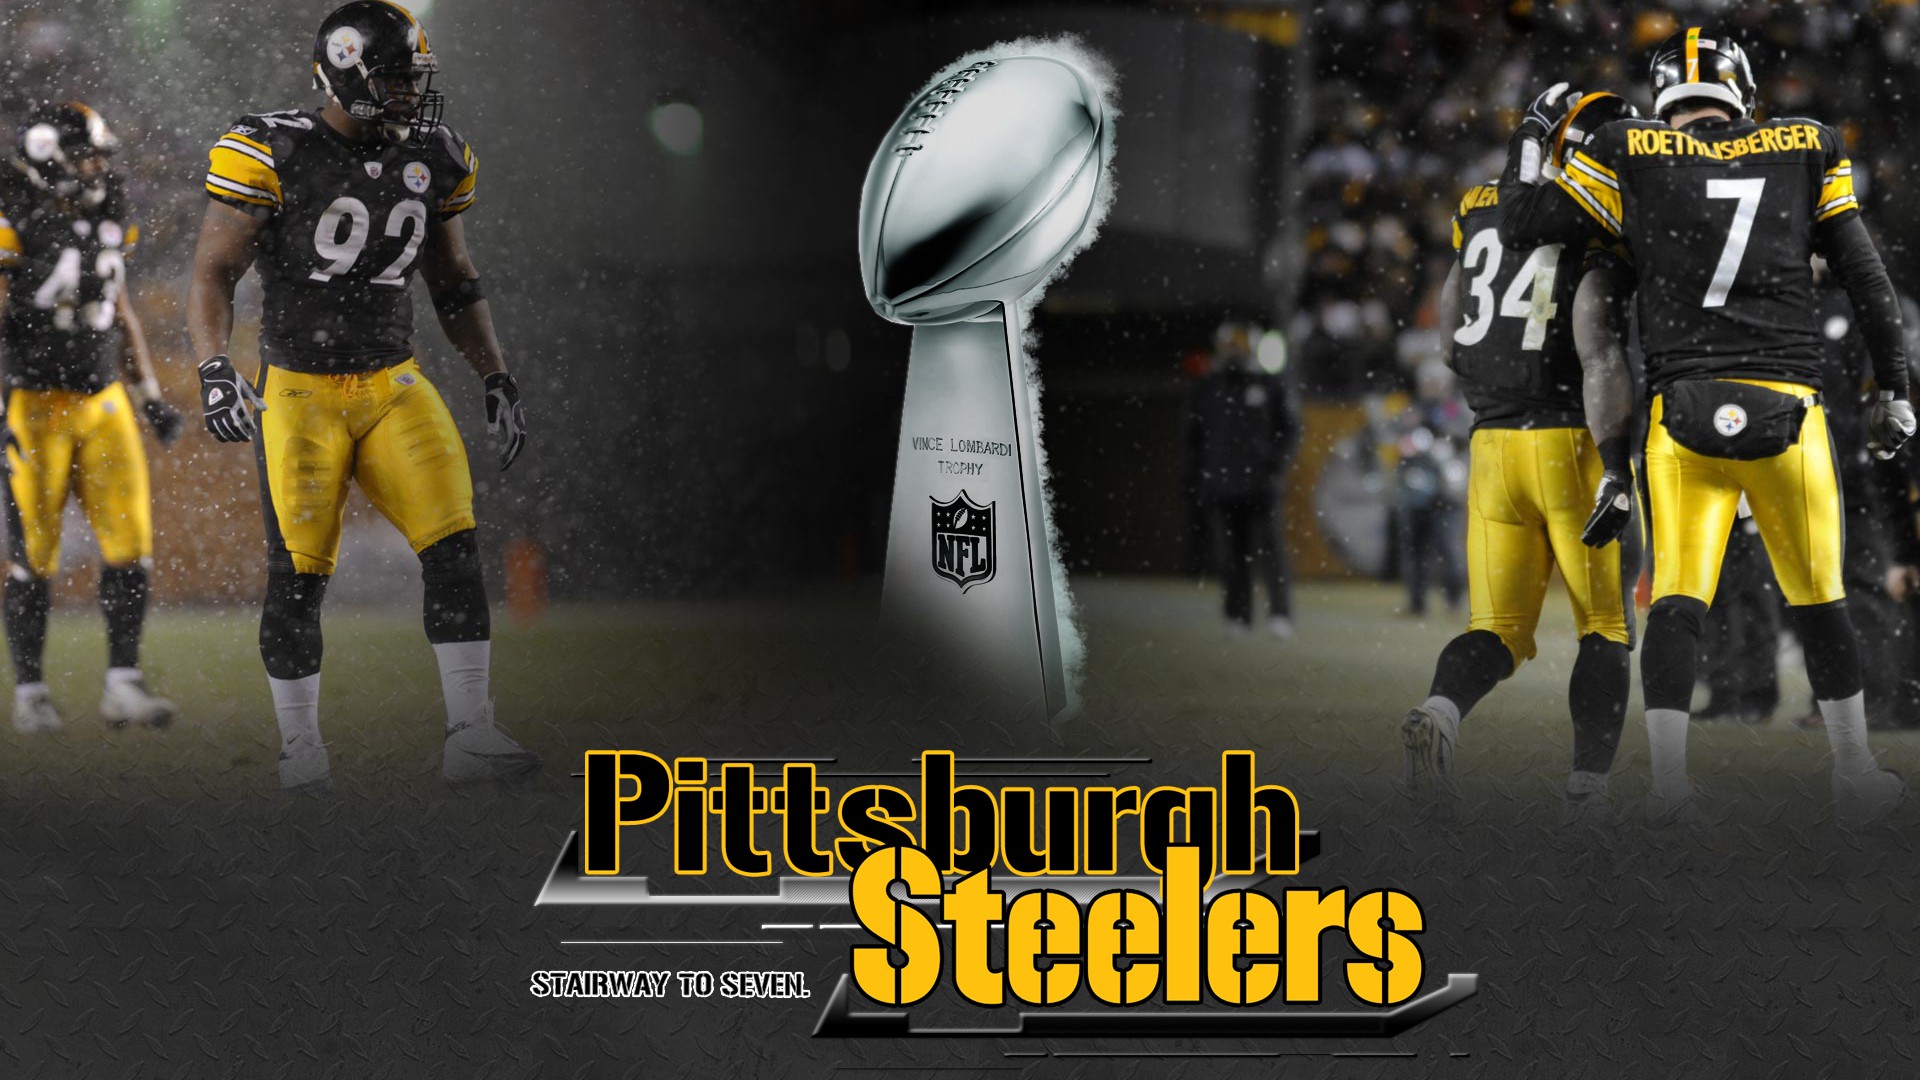 HD Pittsburgh Steelers Backgrounds with resolution 1920x1080 pixel. You can make this wallpaper for your Mac or Windows Desktop Background, iPhone, Android or Tablet and another Smartphone device